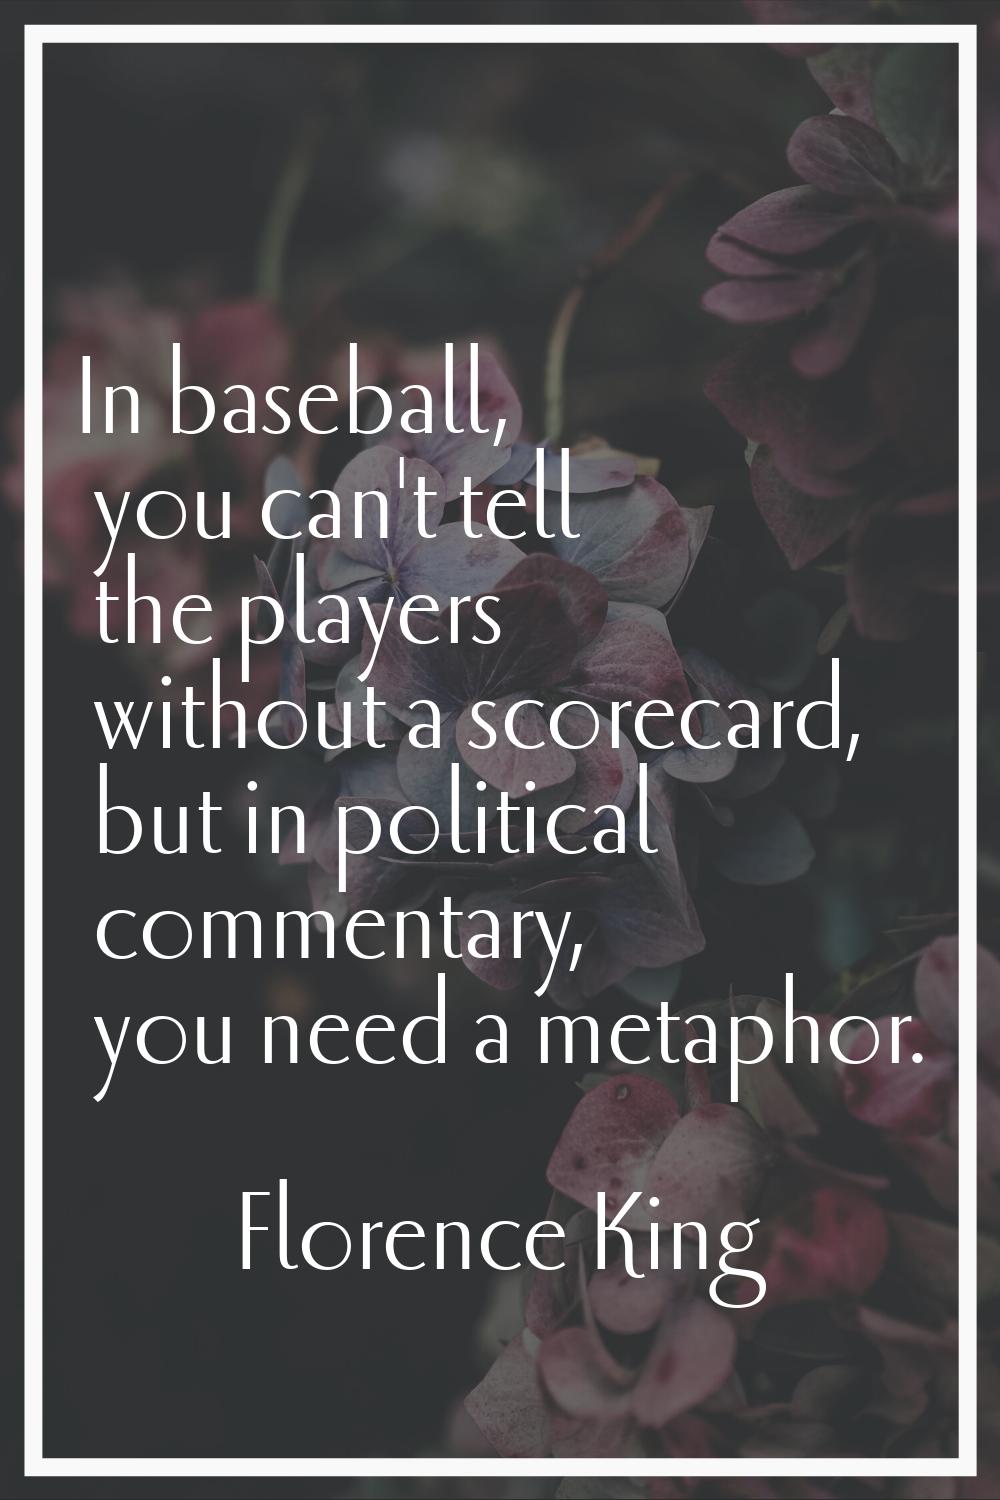 In baseball, you can't tell the players without a scorecard, but in political commentary, you need 